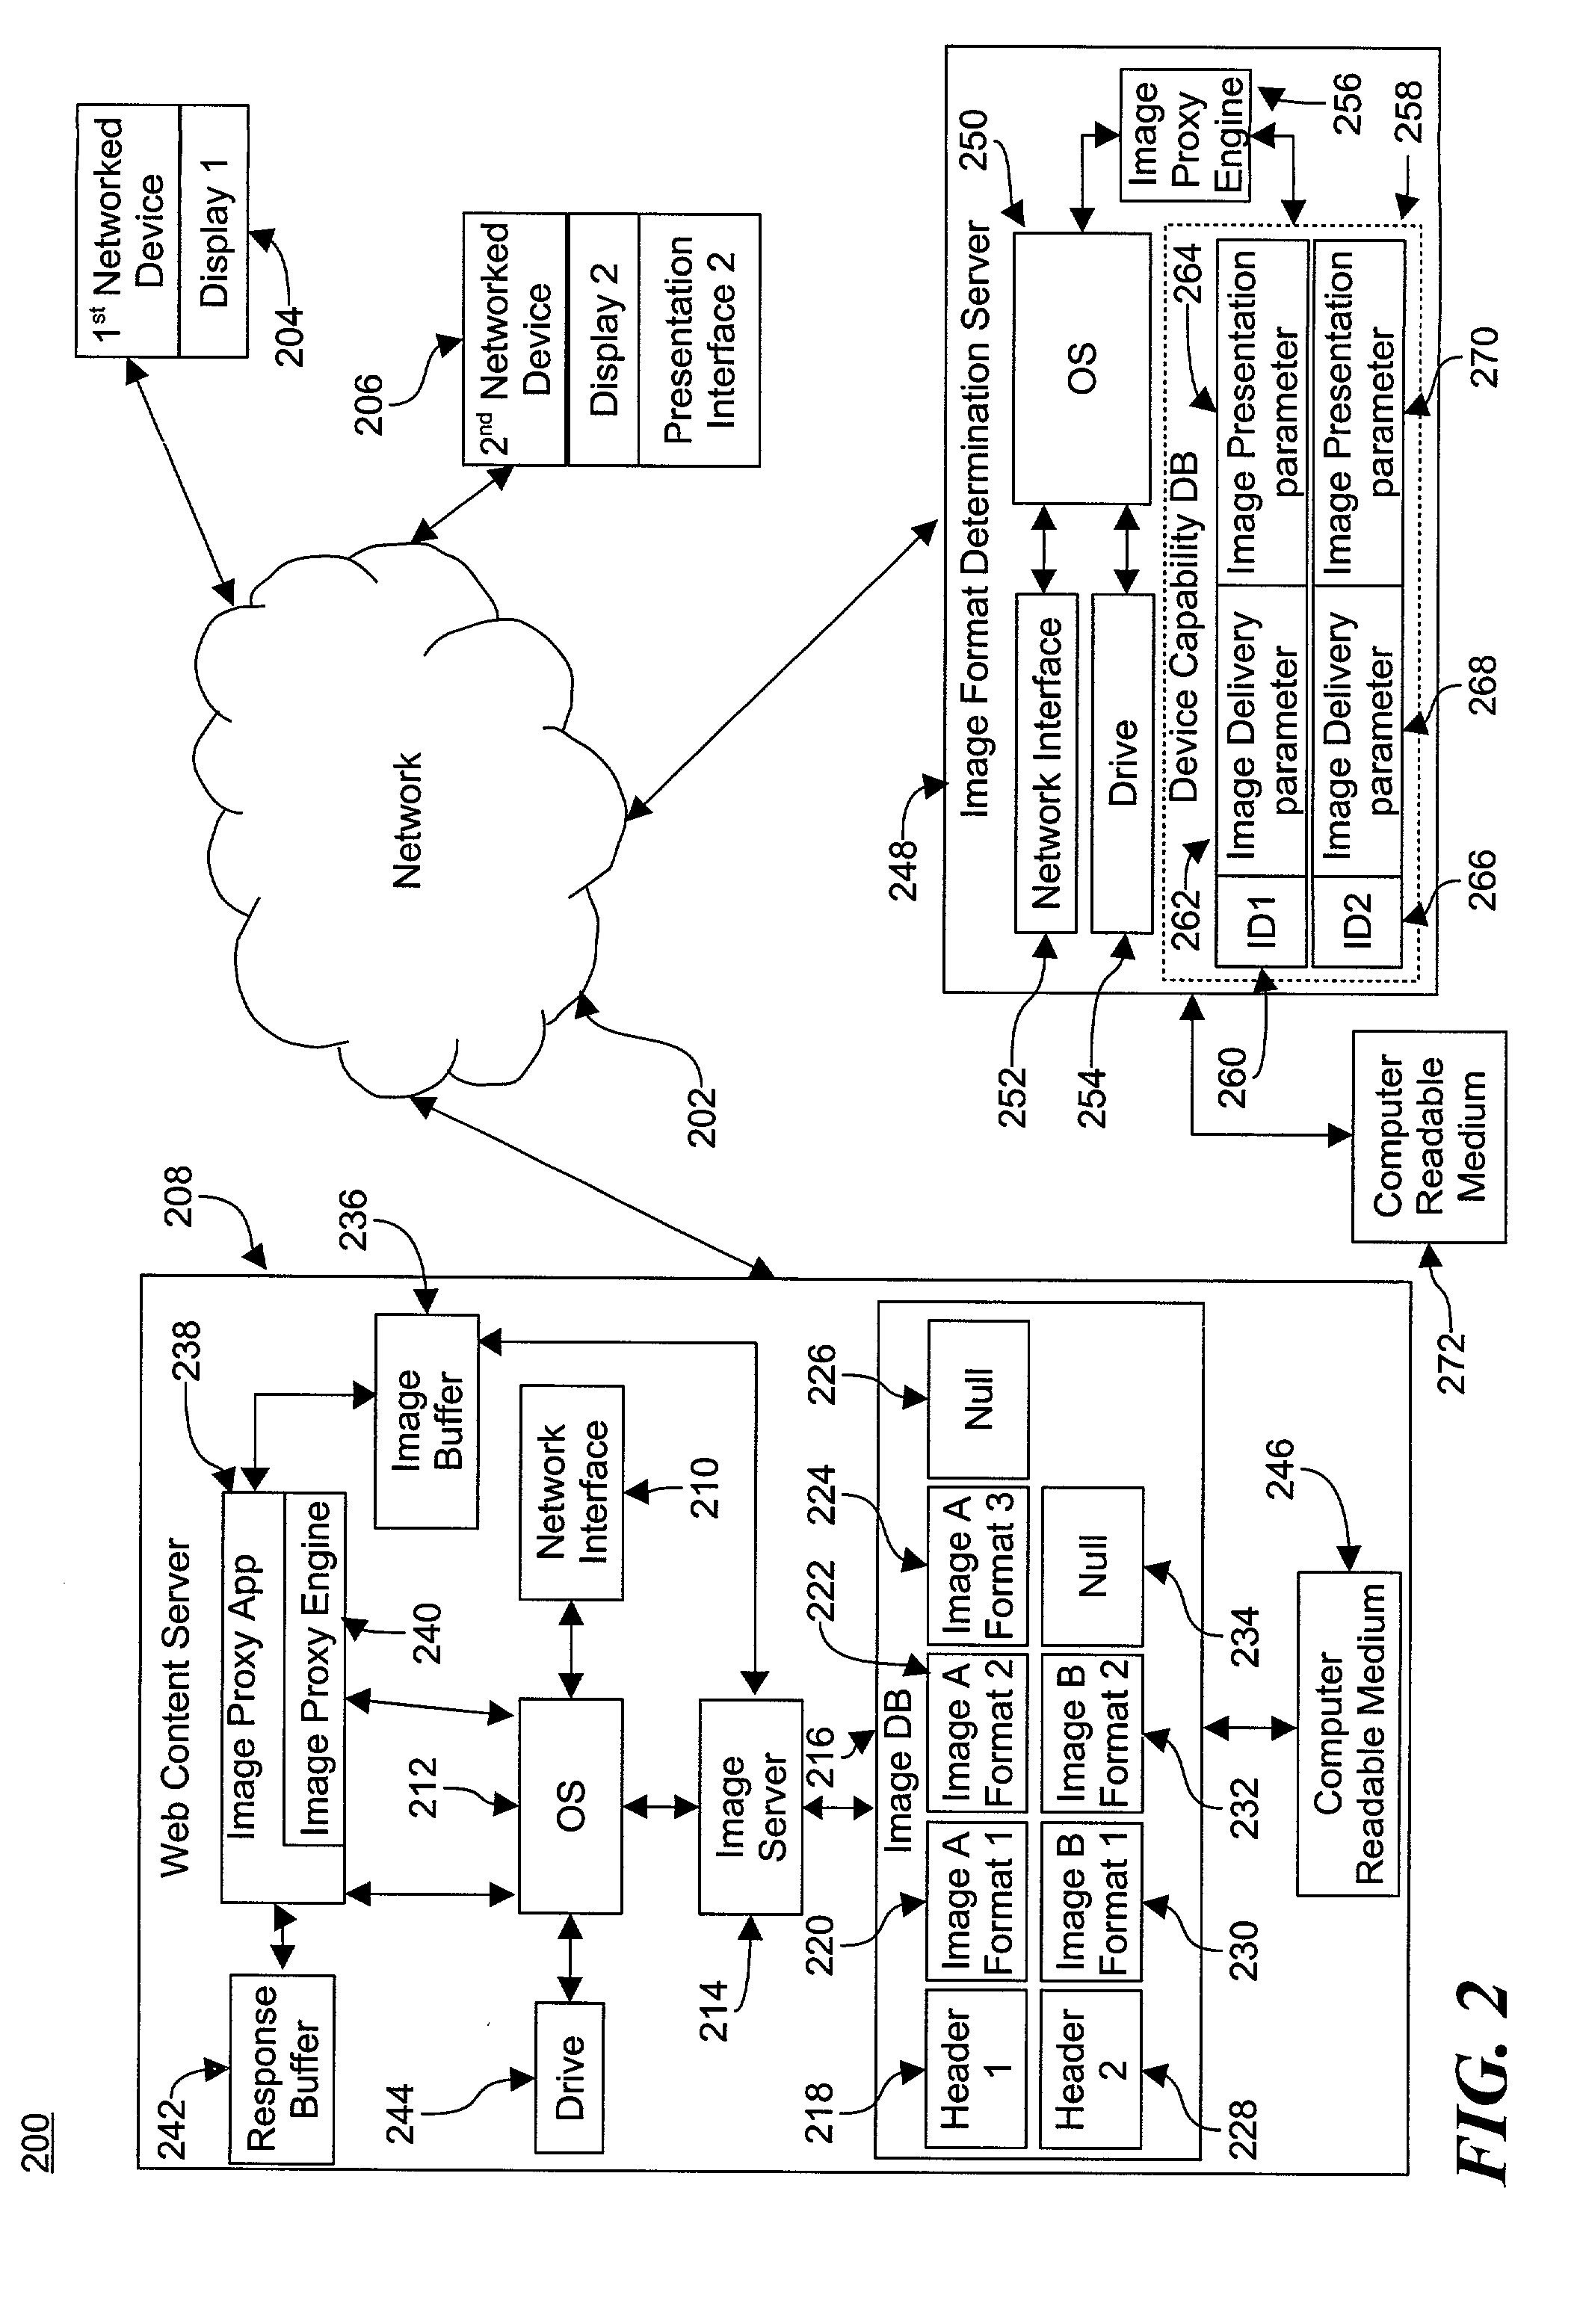 System and method for adaptive formatting of image information for efficient delivery and presentation